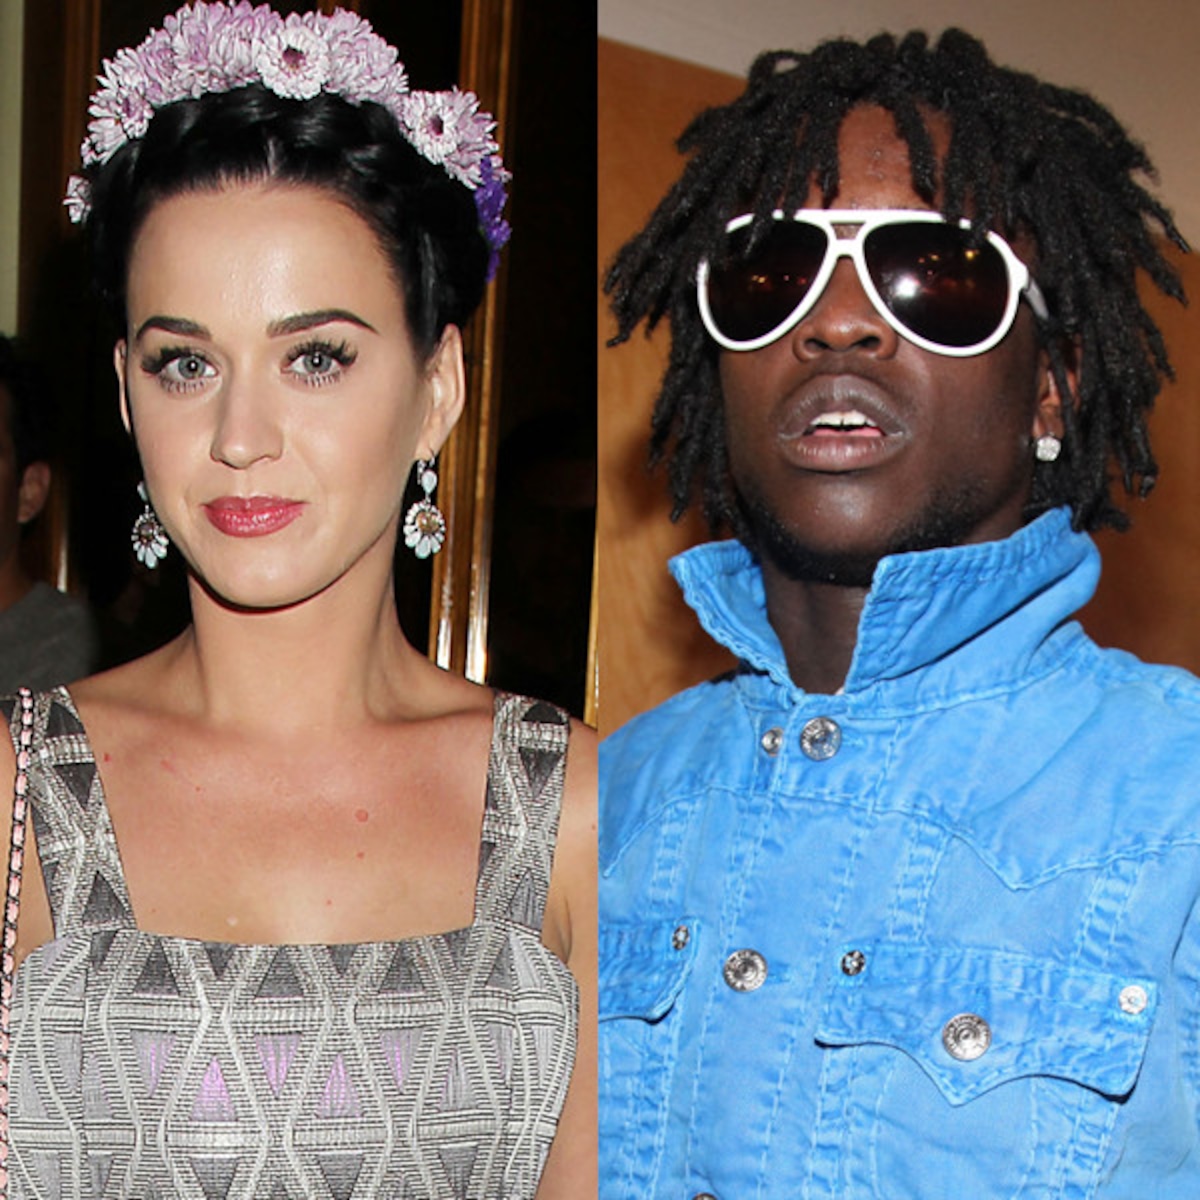 Katy Perry Apology To Chief Keef Chills Feud - E! Online - Ca